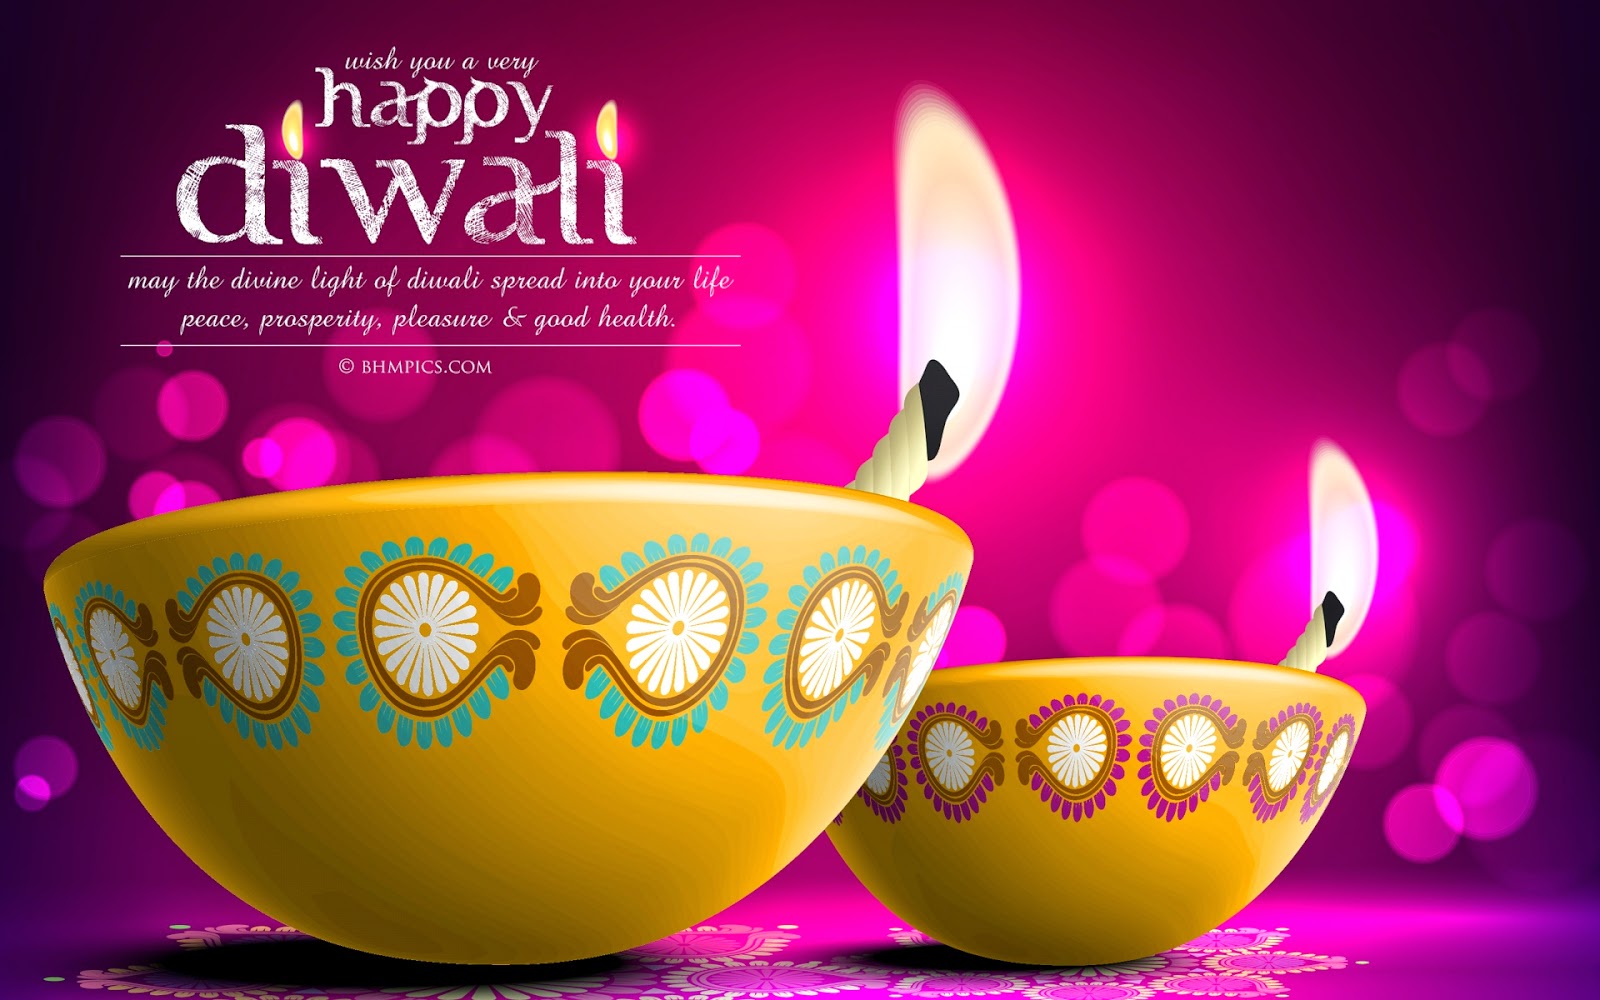 The Joy of Diwali – Share the happiness!